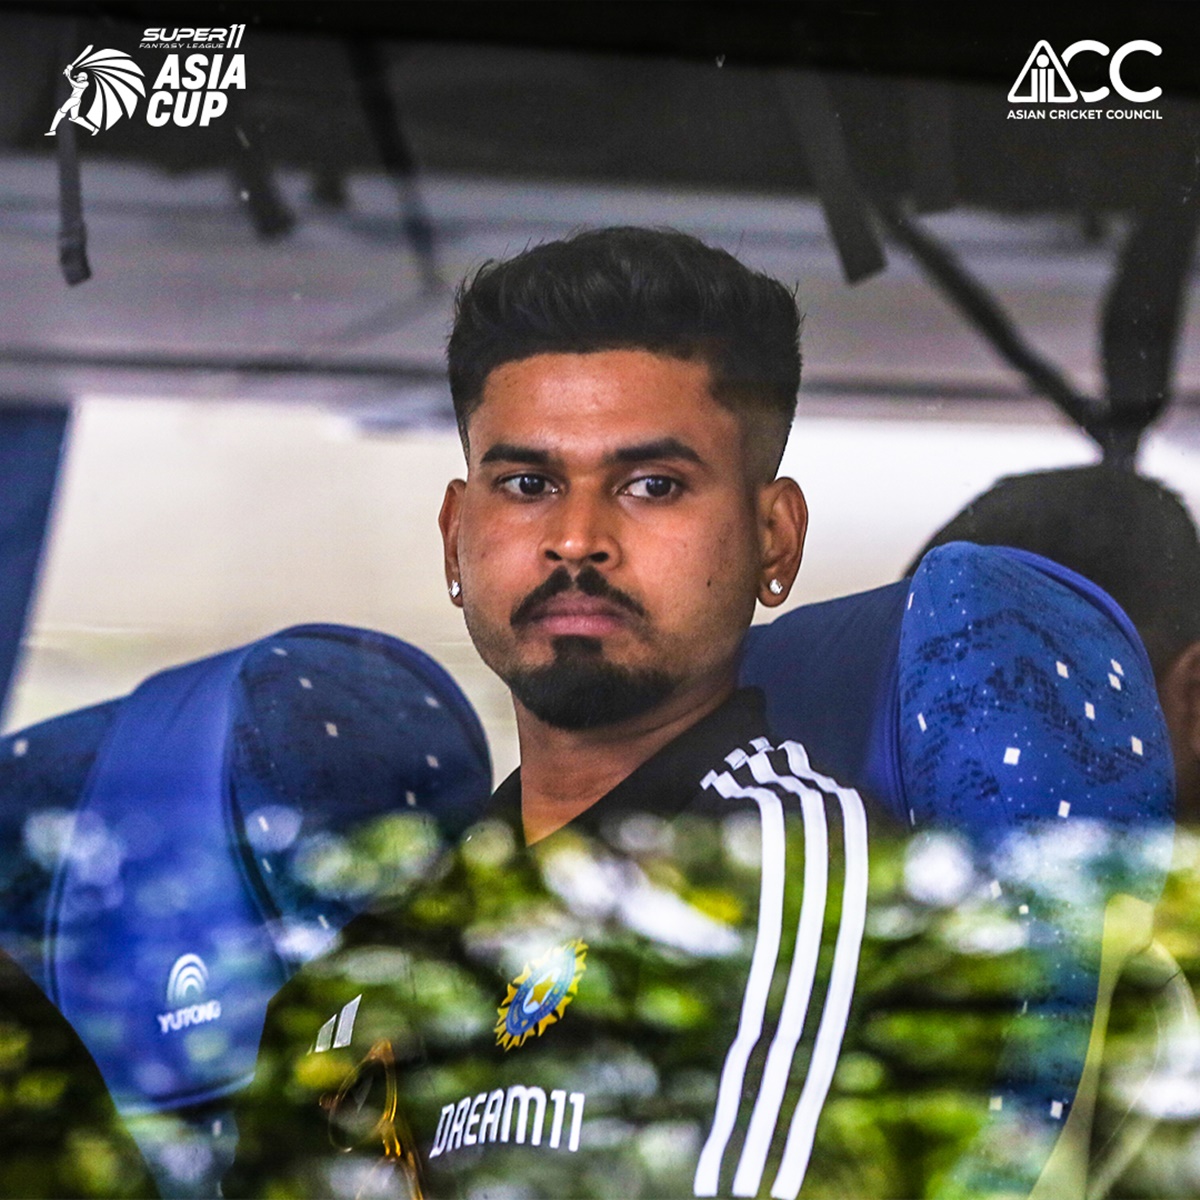 Why Shreyas Iyer is missing in action vs Pakistan?